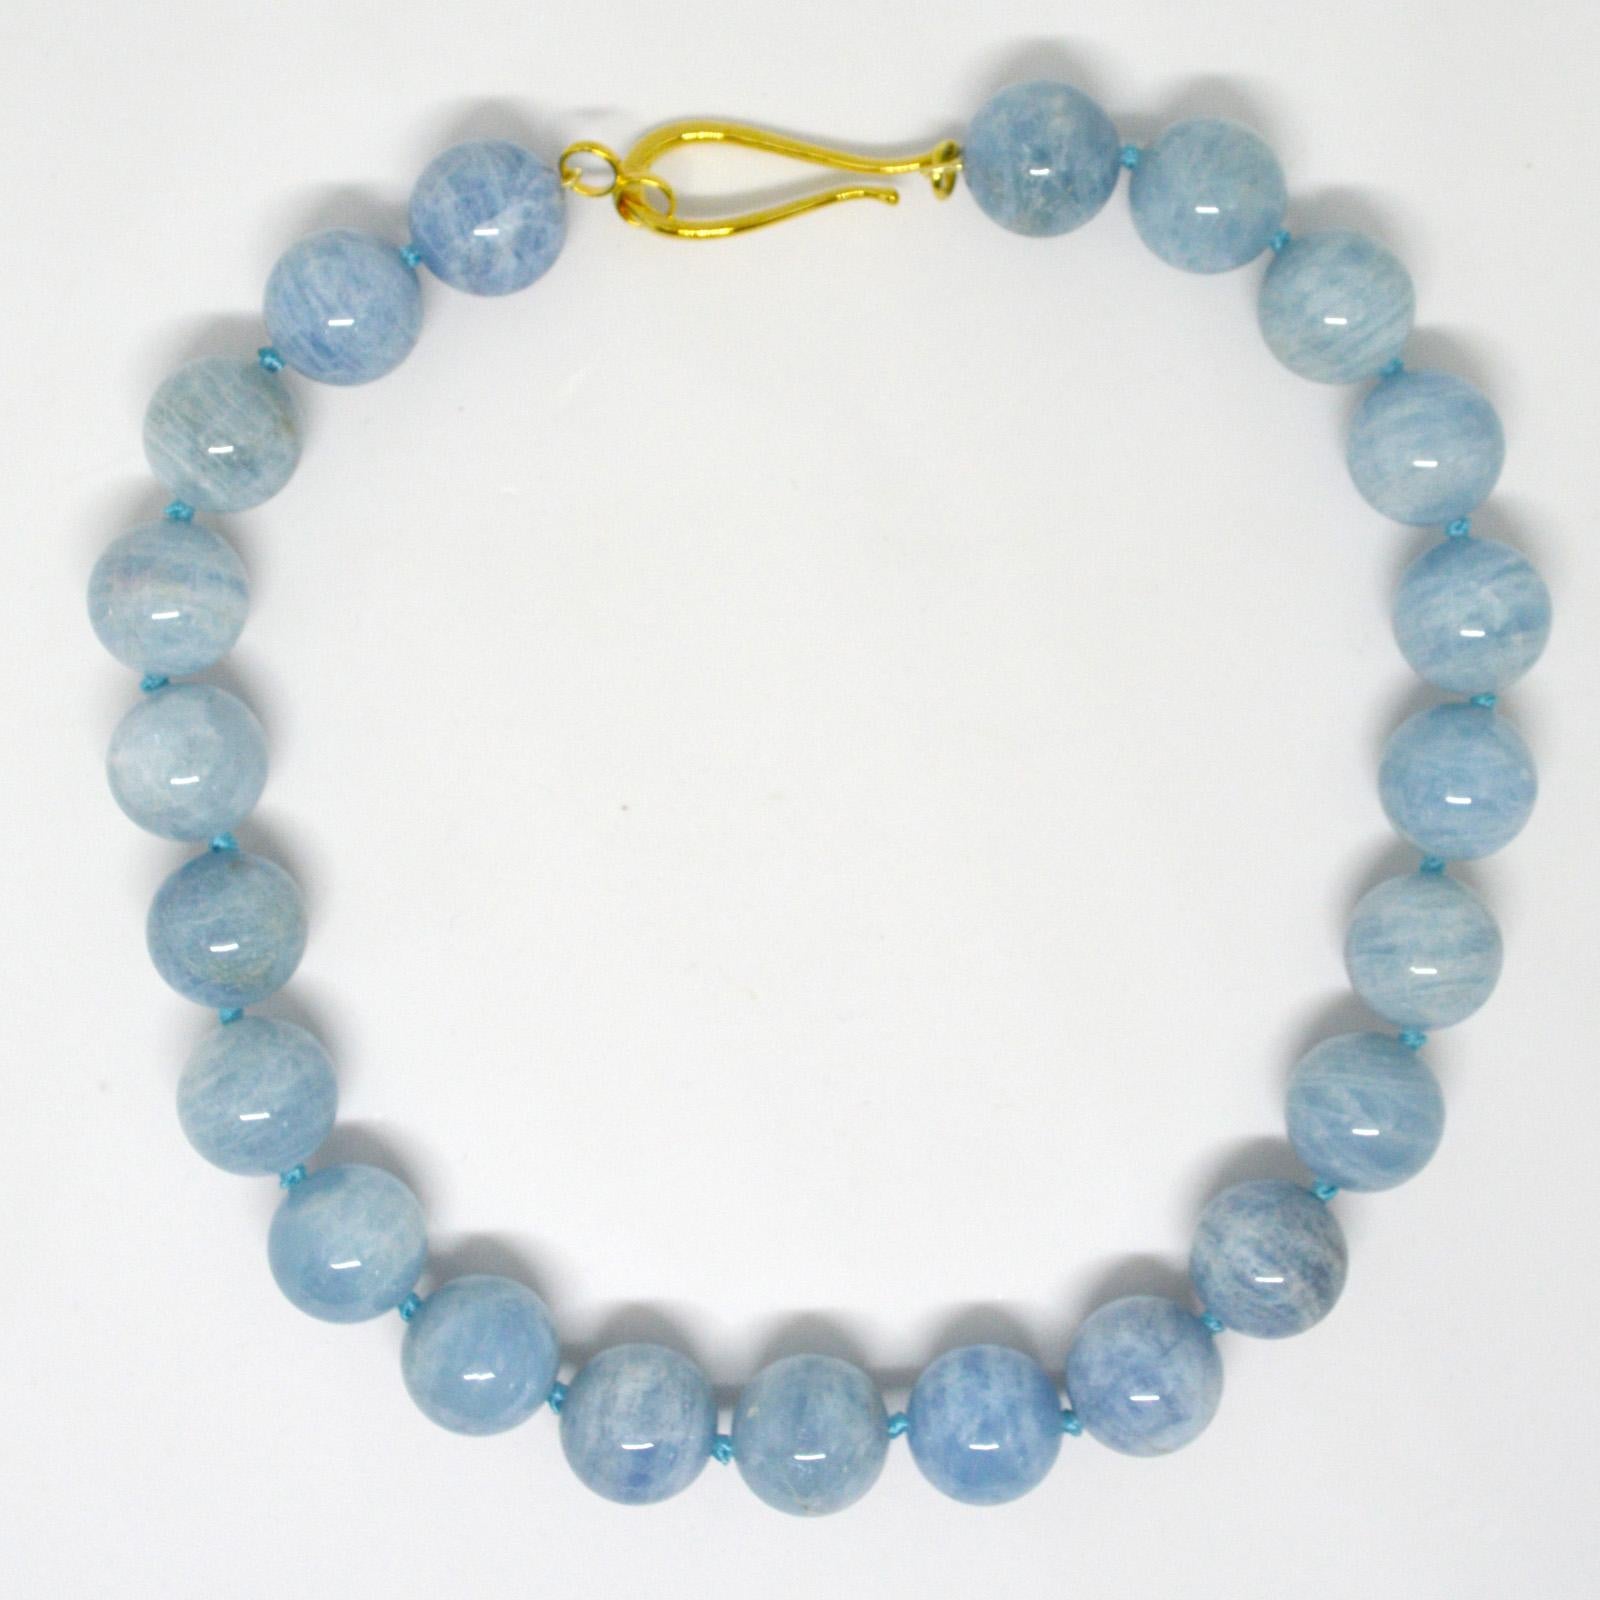 18mm polished round natural blue Aquamarine necklace.
Gold Plate Sterling Silver 55mm hook clasp.
48cm necklace.